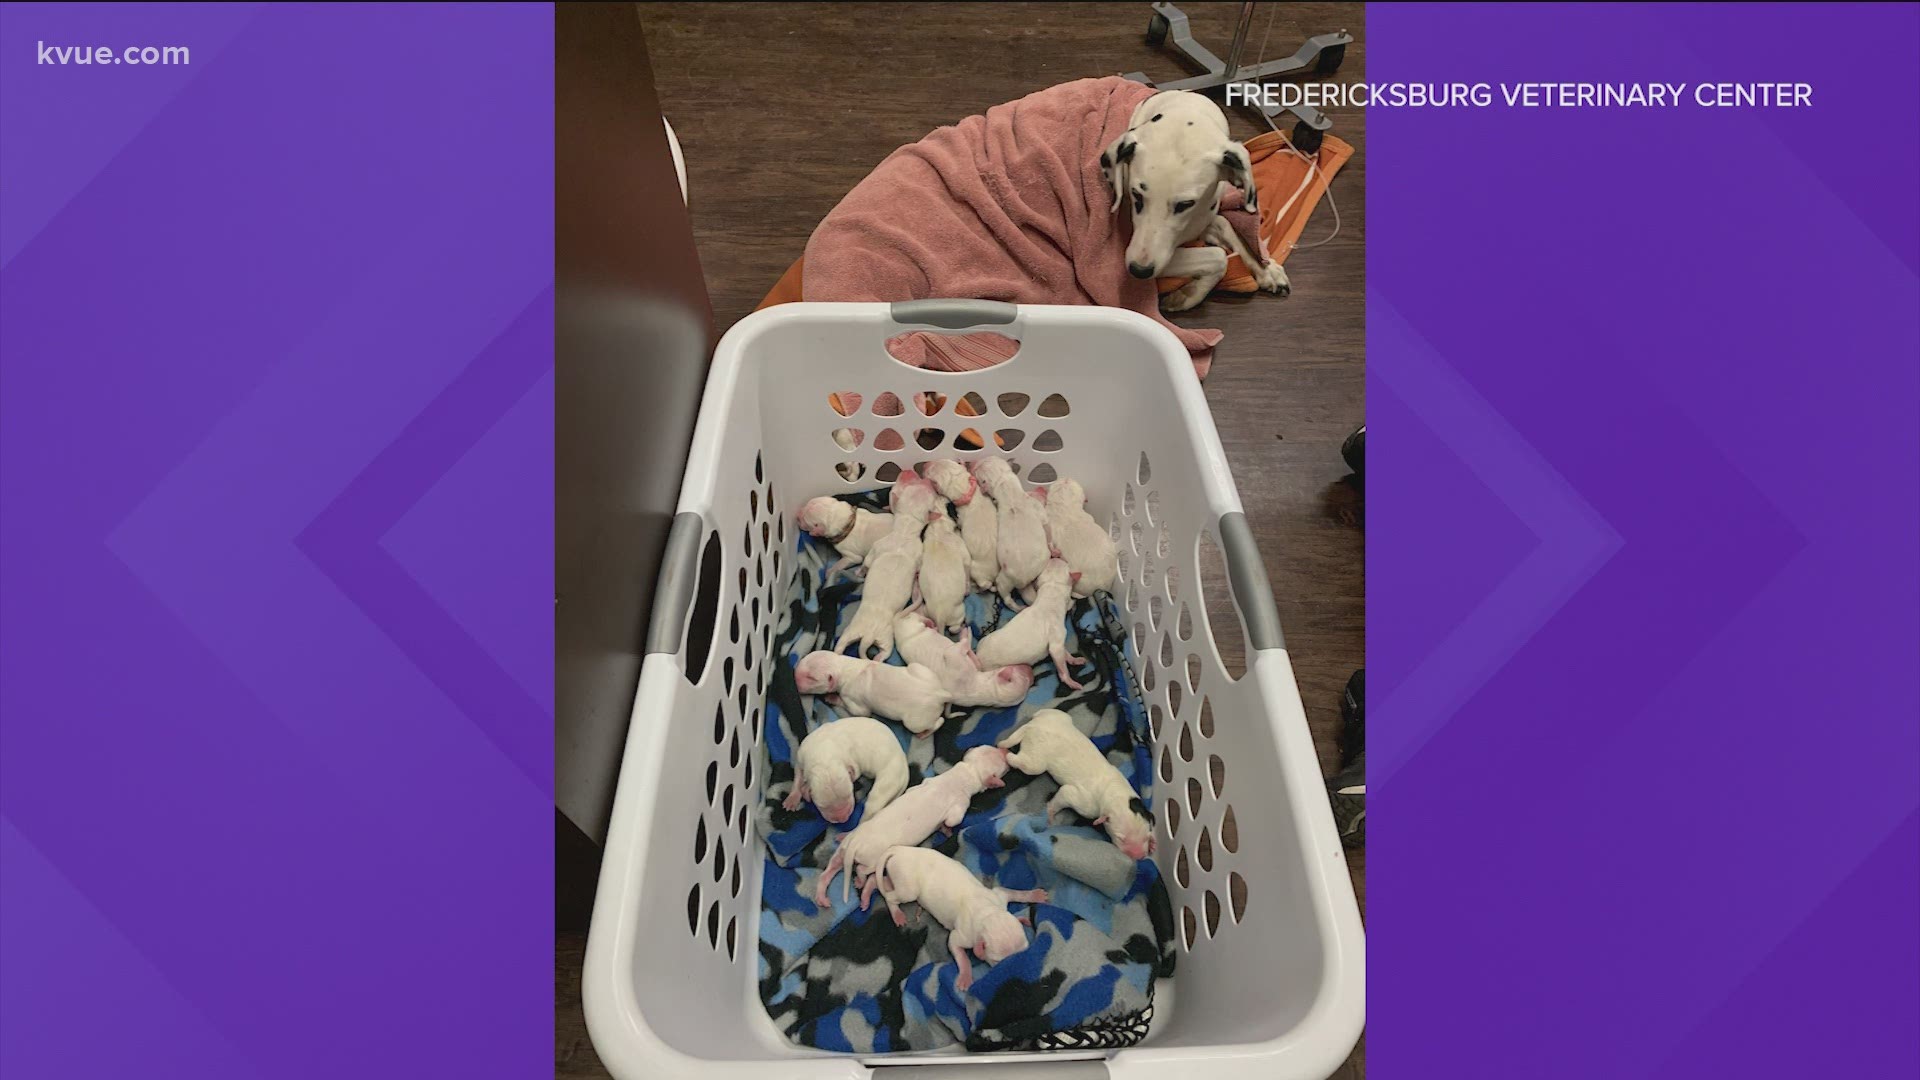 It's no Disney movie, but it's up there! A Dalmatian in Fredericksburg gave birth to 16 puppies.